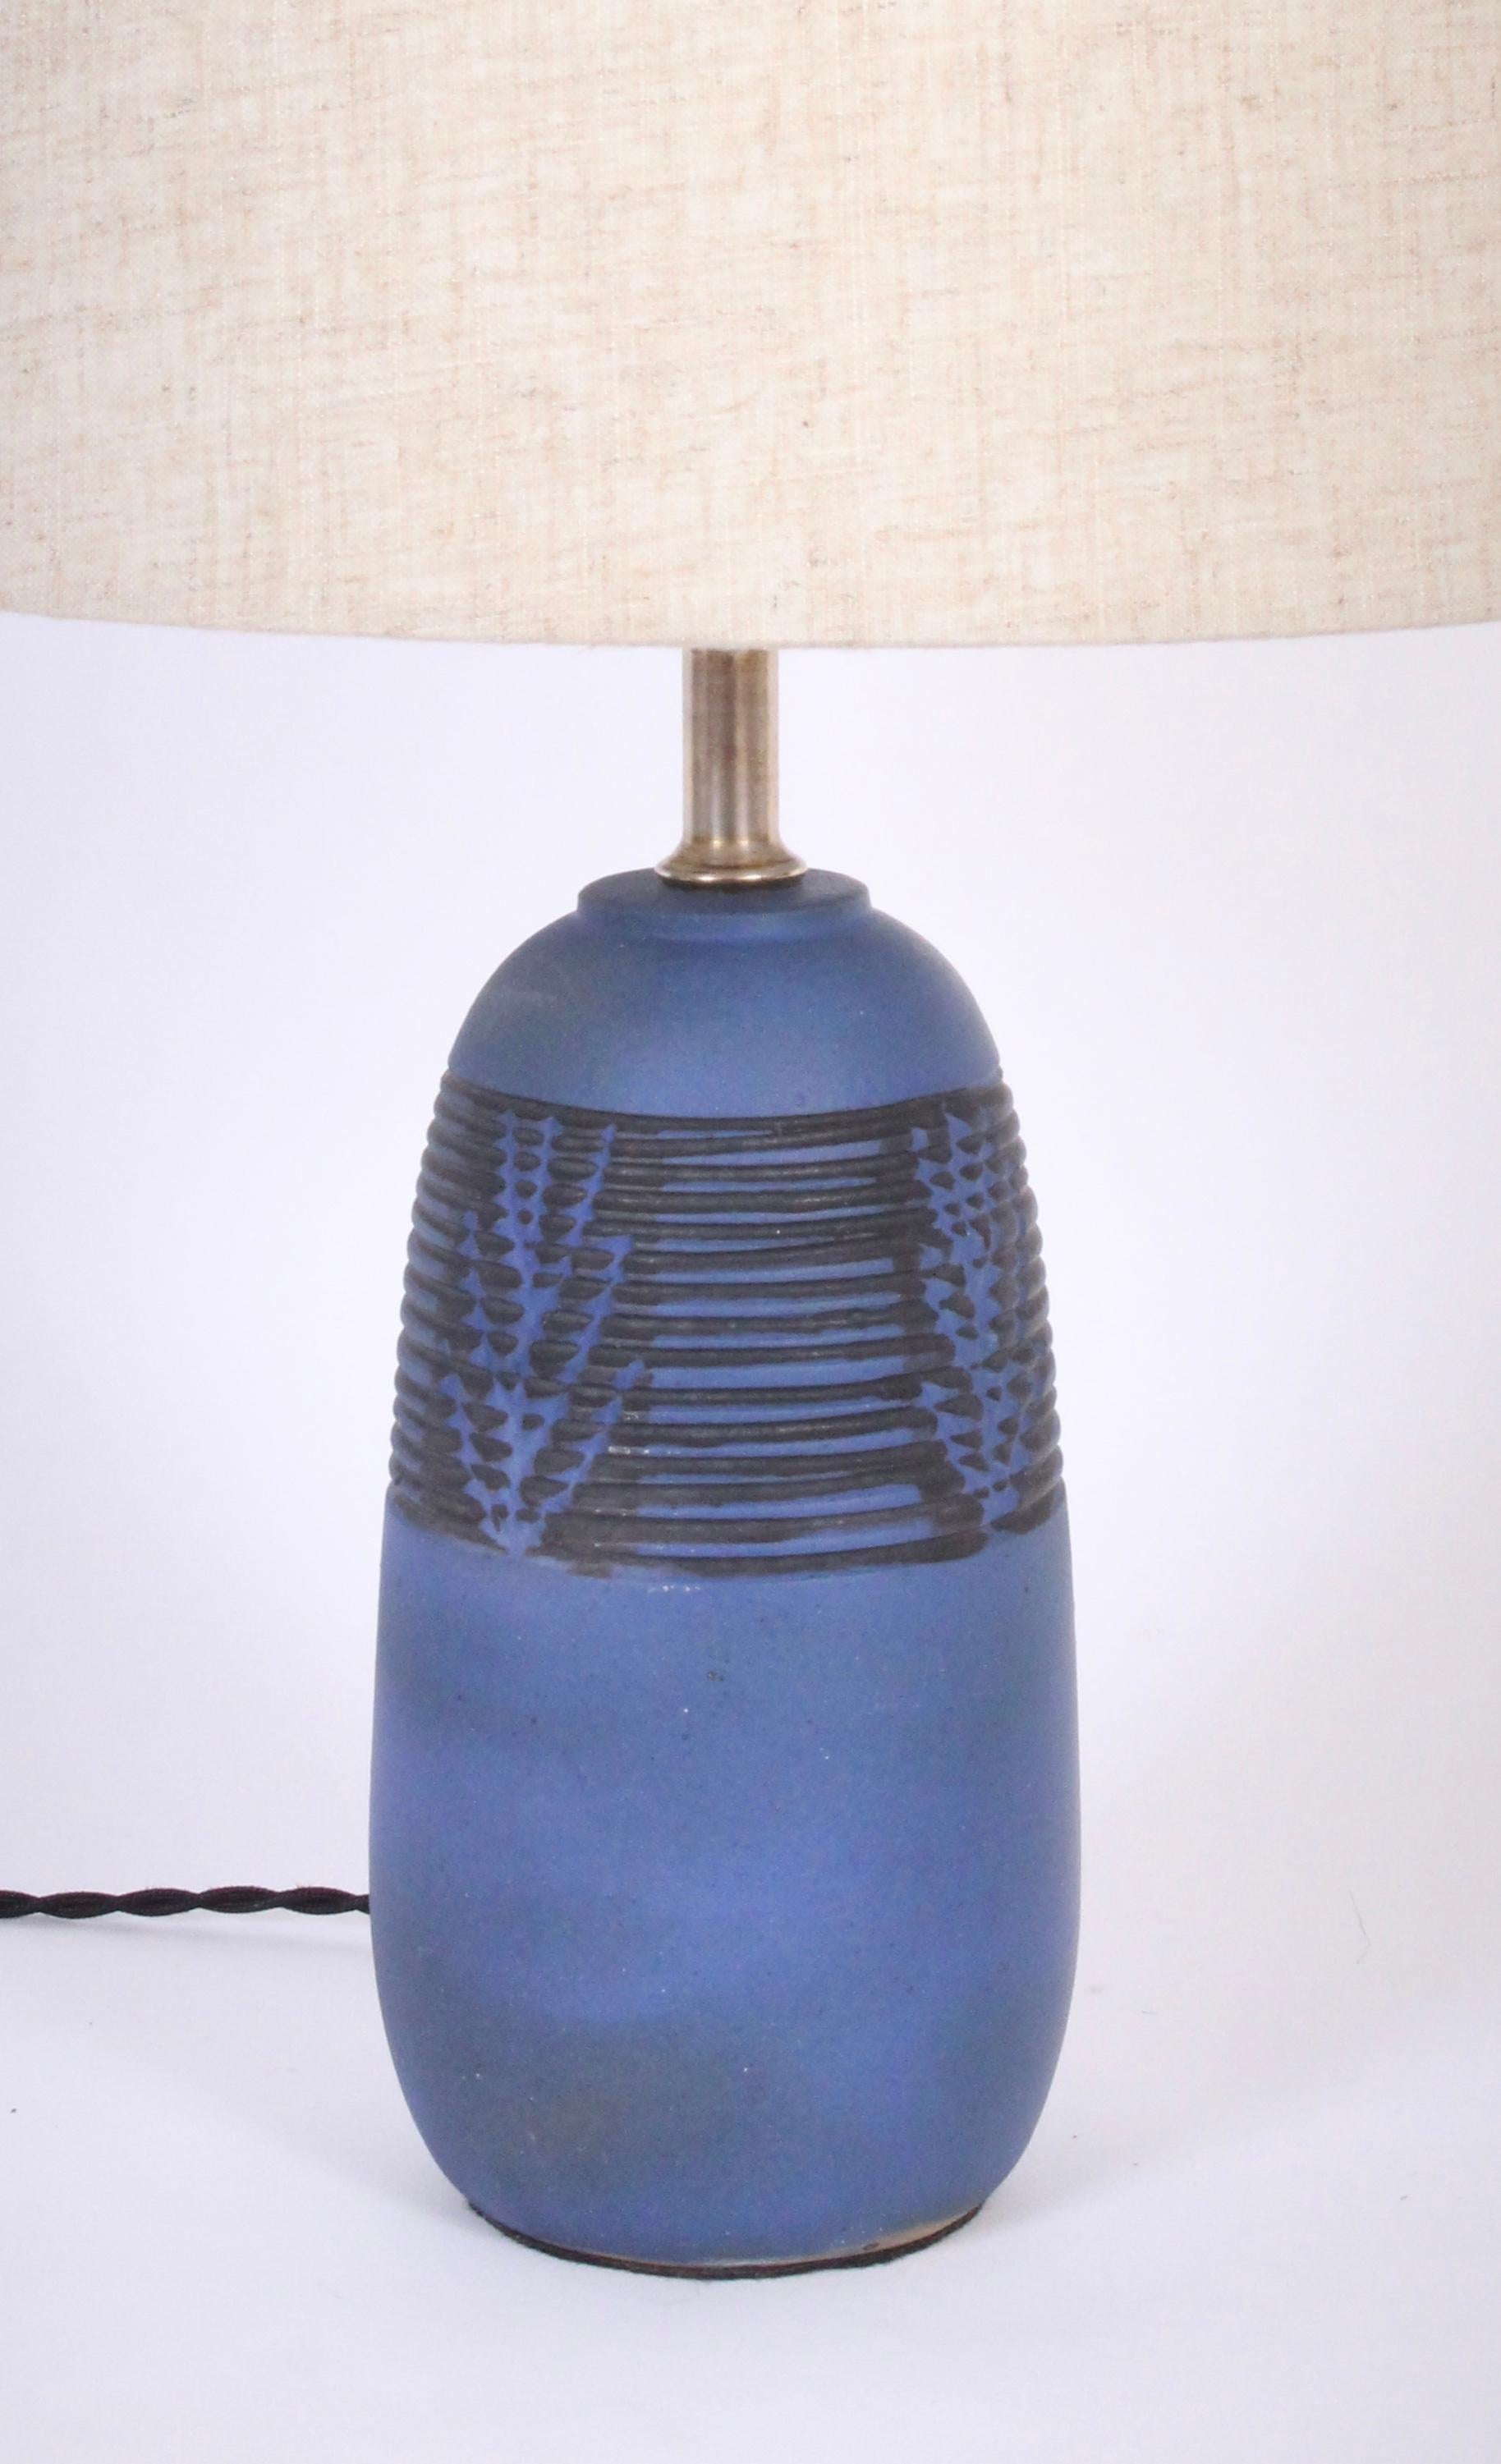 Smaller Nancy Wickham Boyd for Design Technics carved blue ceramic bedside lamp with black detail. Handcrafted blue matte glazed form accented with applied Black paint. Small footprint. 13H to socket. Ceramic 8.5H. Shade shown for display only (9H x